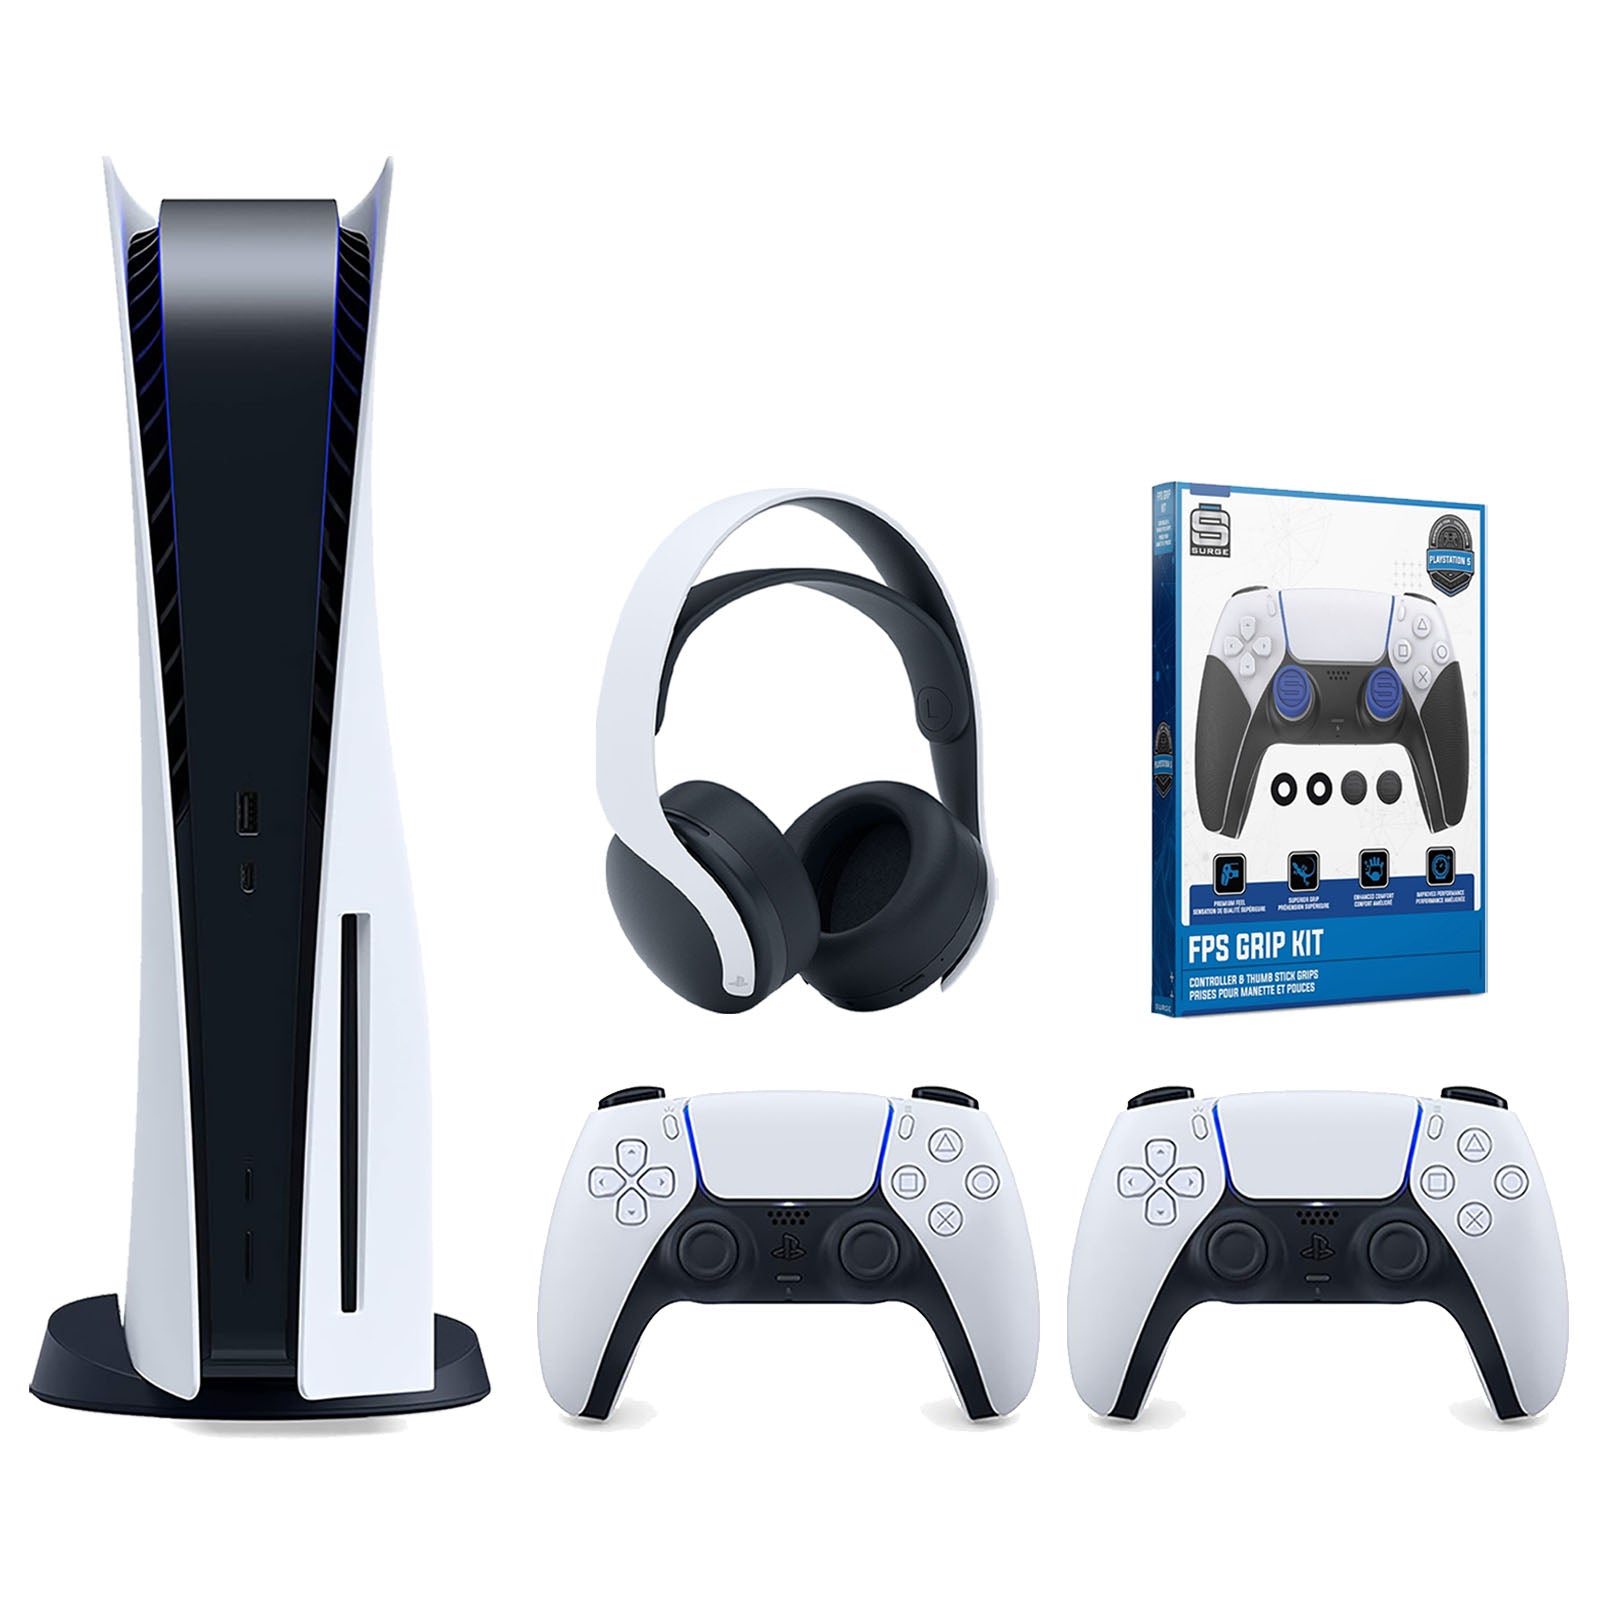 Sony Playstation 5 Disc Version Console with Extra White Controller, White PULSE 3D Headset and Surge FPS Grip Kit With Precision Aiming Rings Bundle - Pro-Distributing